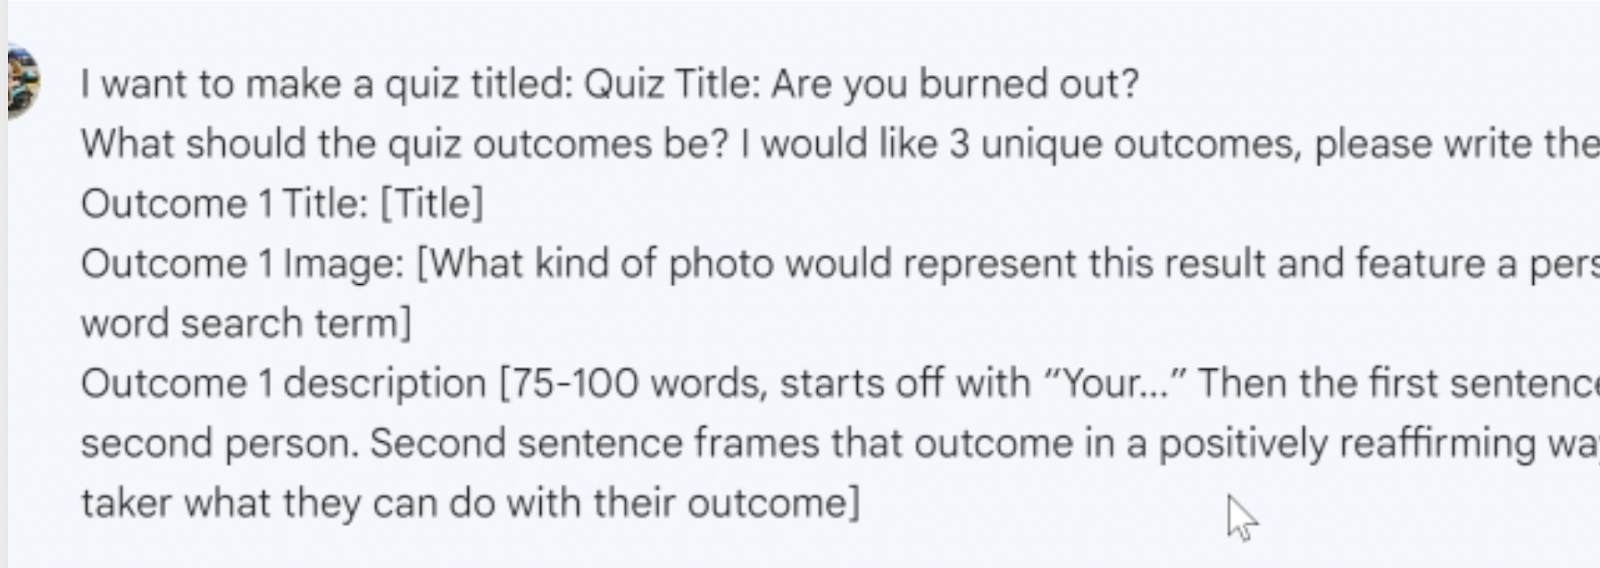 prompt example to getting quiz outcomes from AI